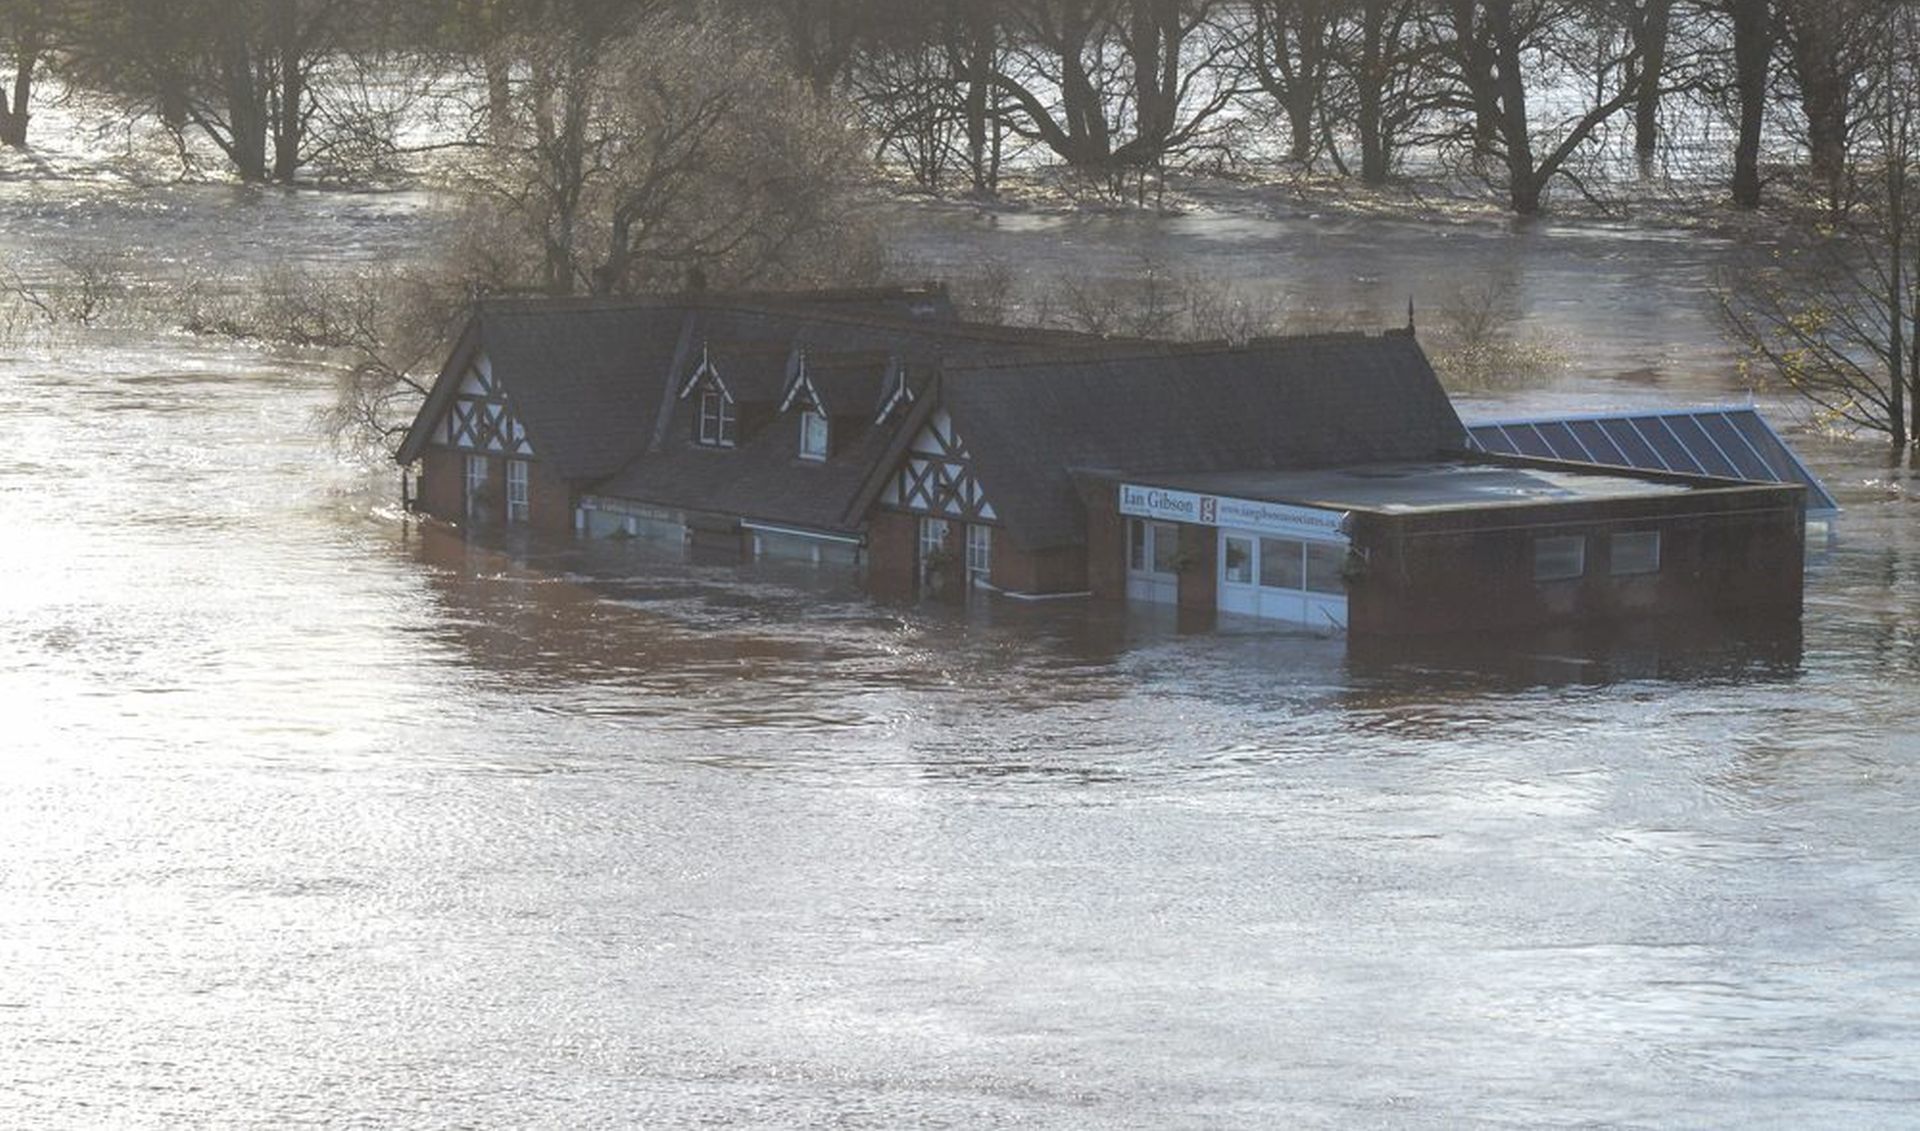 epa05057687 A handout picture made available by the British Ministry of Defence (MOD) shows partially submerged buildings, North West England, Britain, 06 December 2015. Army personnel from 2nd Battalion Duke of Lancaster's Regiment, based in Weeton Barracks near Preston, have been deployed to assist with the flooding response operation with around 350 personnel potentially available within the Battalion. Storm Desmond brought extreme weather to many other areas of northern England and Scotland as the government issued severe flood warnings for 31 areas of England and Wales, with many of the warnings along swollen rivers.  EPA/BRITISH MINISTRY OF DEFENCE/CPL MICHAEL STRACHAN MANDATORY CREDIT: CROWN COPYRIGHT HANDOUT EDITORIAL USE ONLY/NO SALES